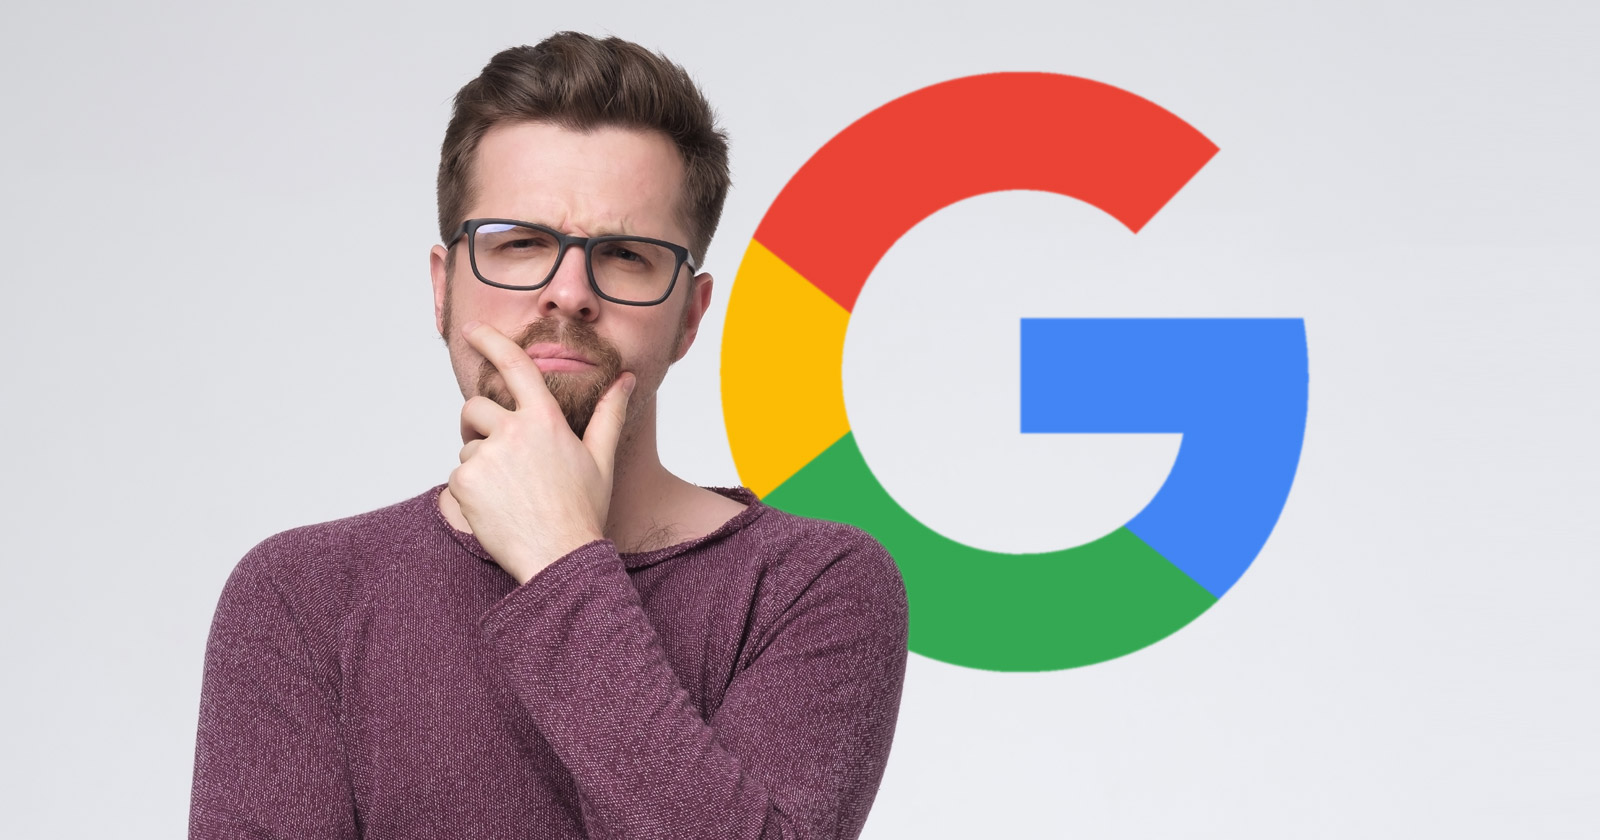 Google: Don't Rely On SEO Tools To Tell You How To Write